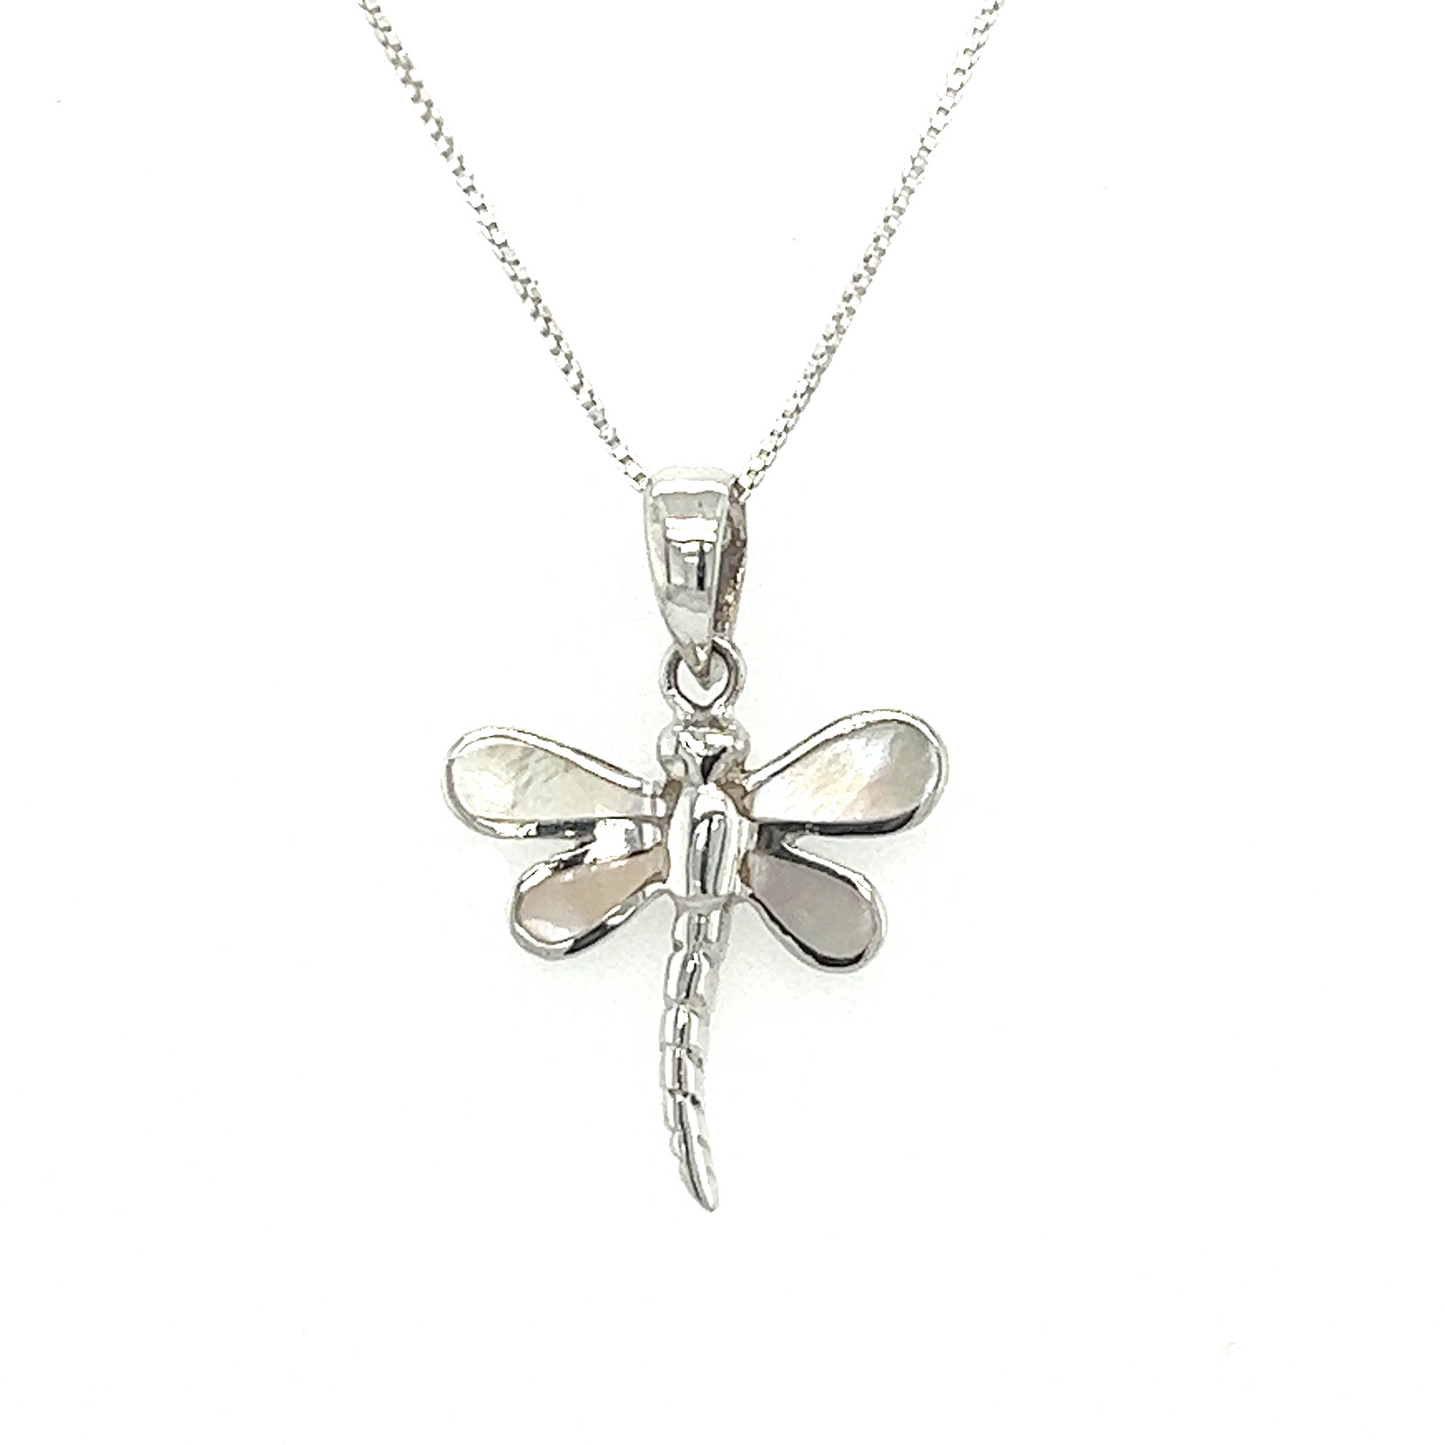 An inlay stone dragonfly pendant delicately hangs from a dainty chain, radiating elegance and charm.